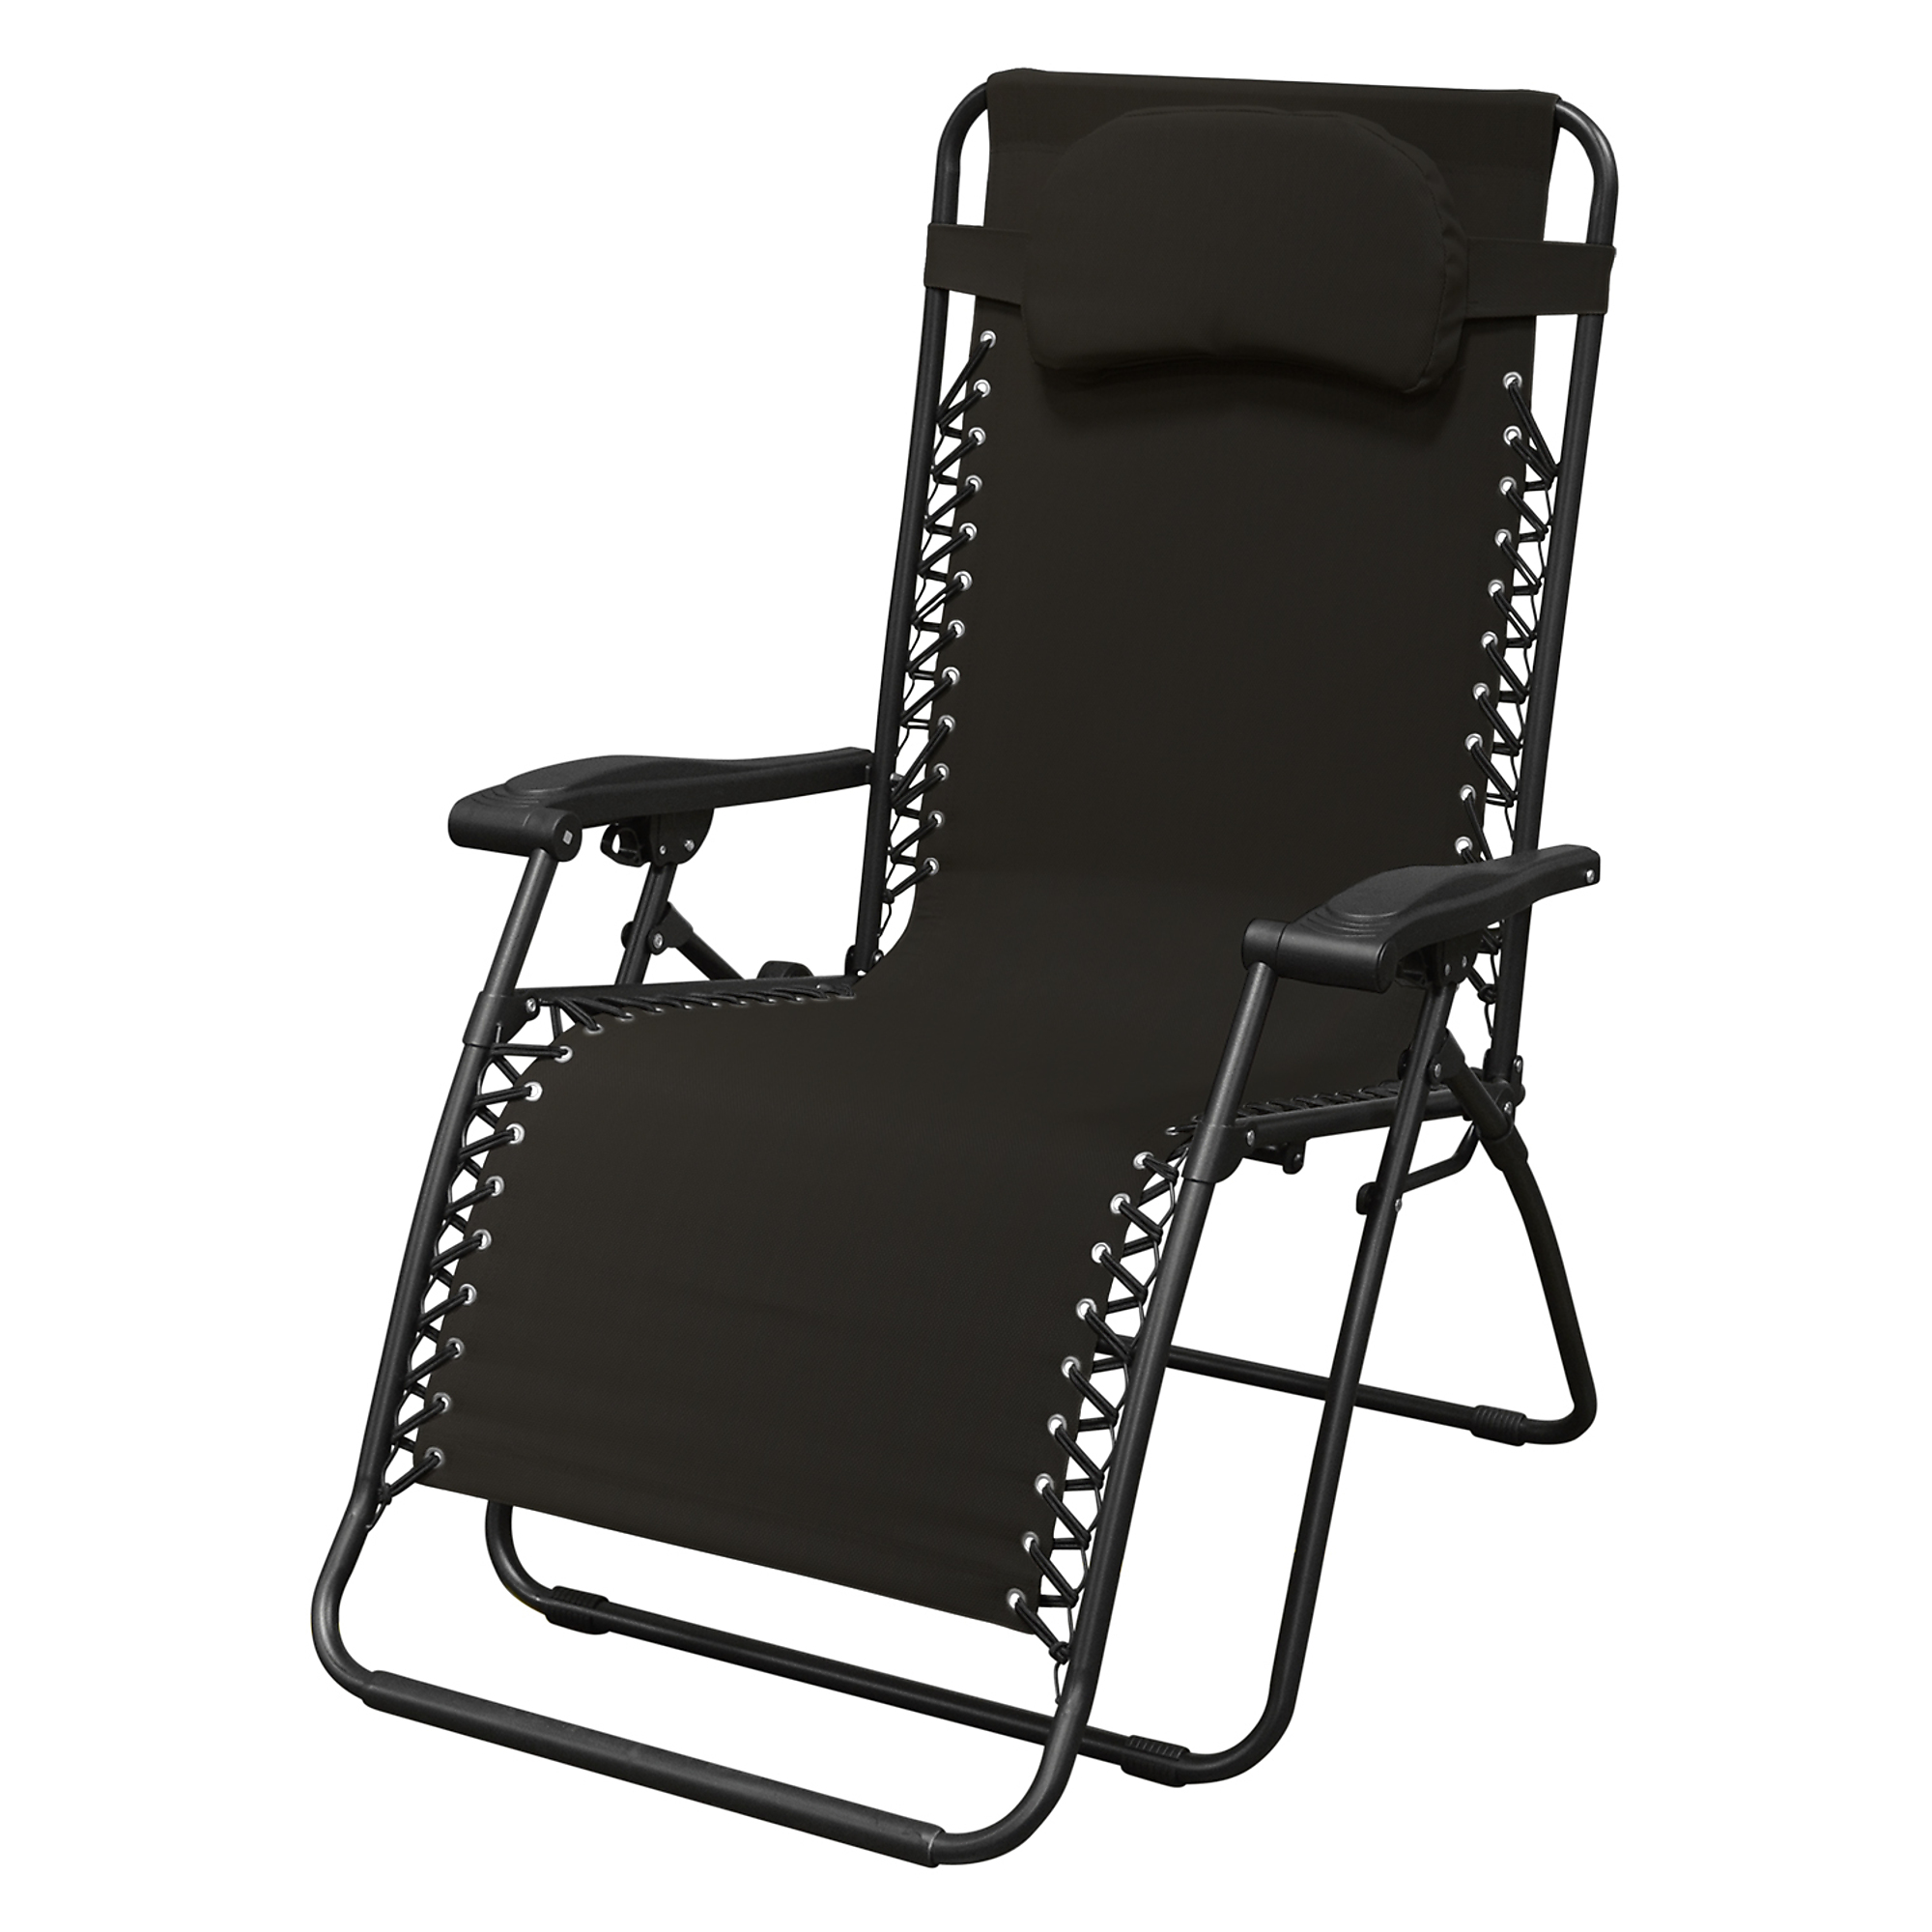 Caravan Canopy, Infinity Oversized Zero Gravity Chair Lounger, Primary Color Black, Material Textile, Width 31.1 in, Model 80009000051